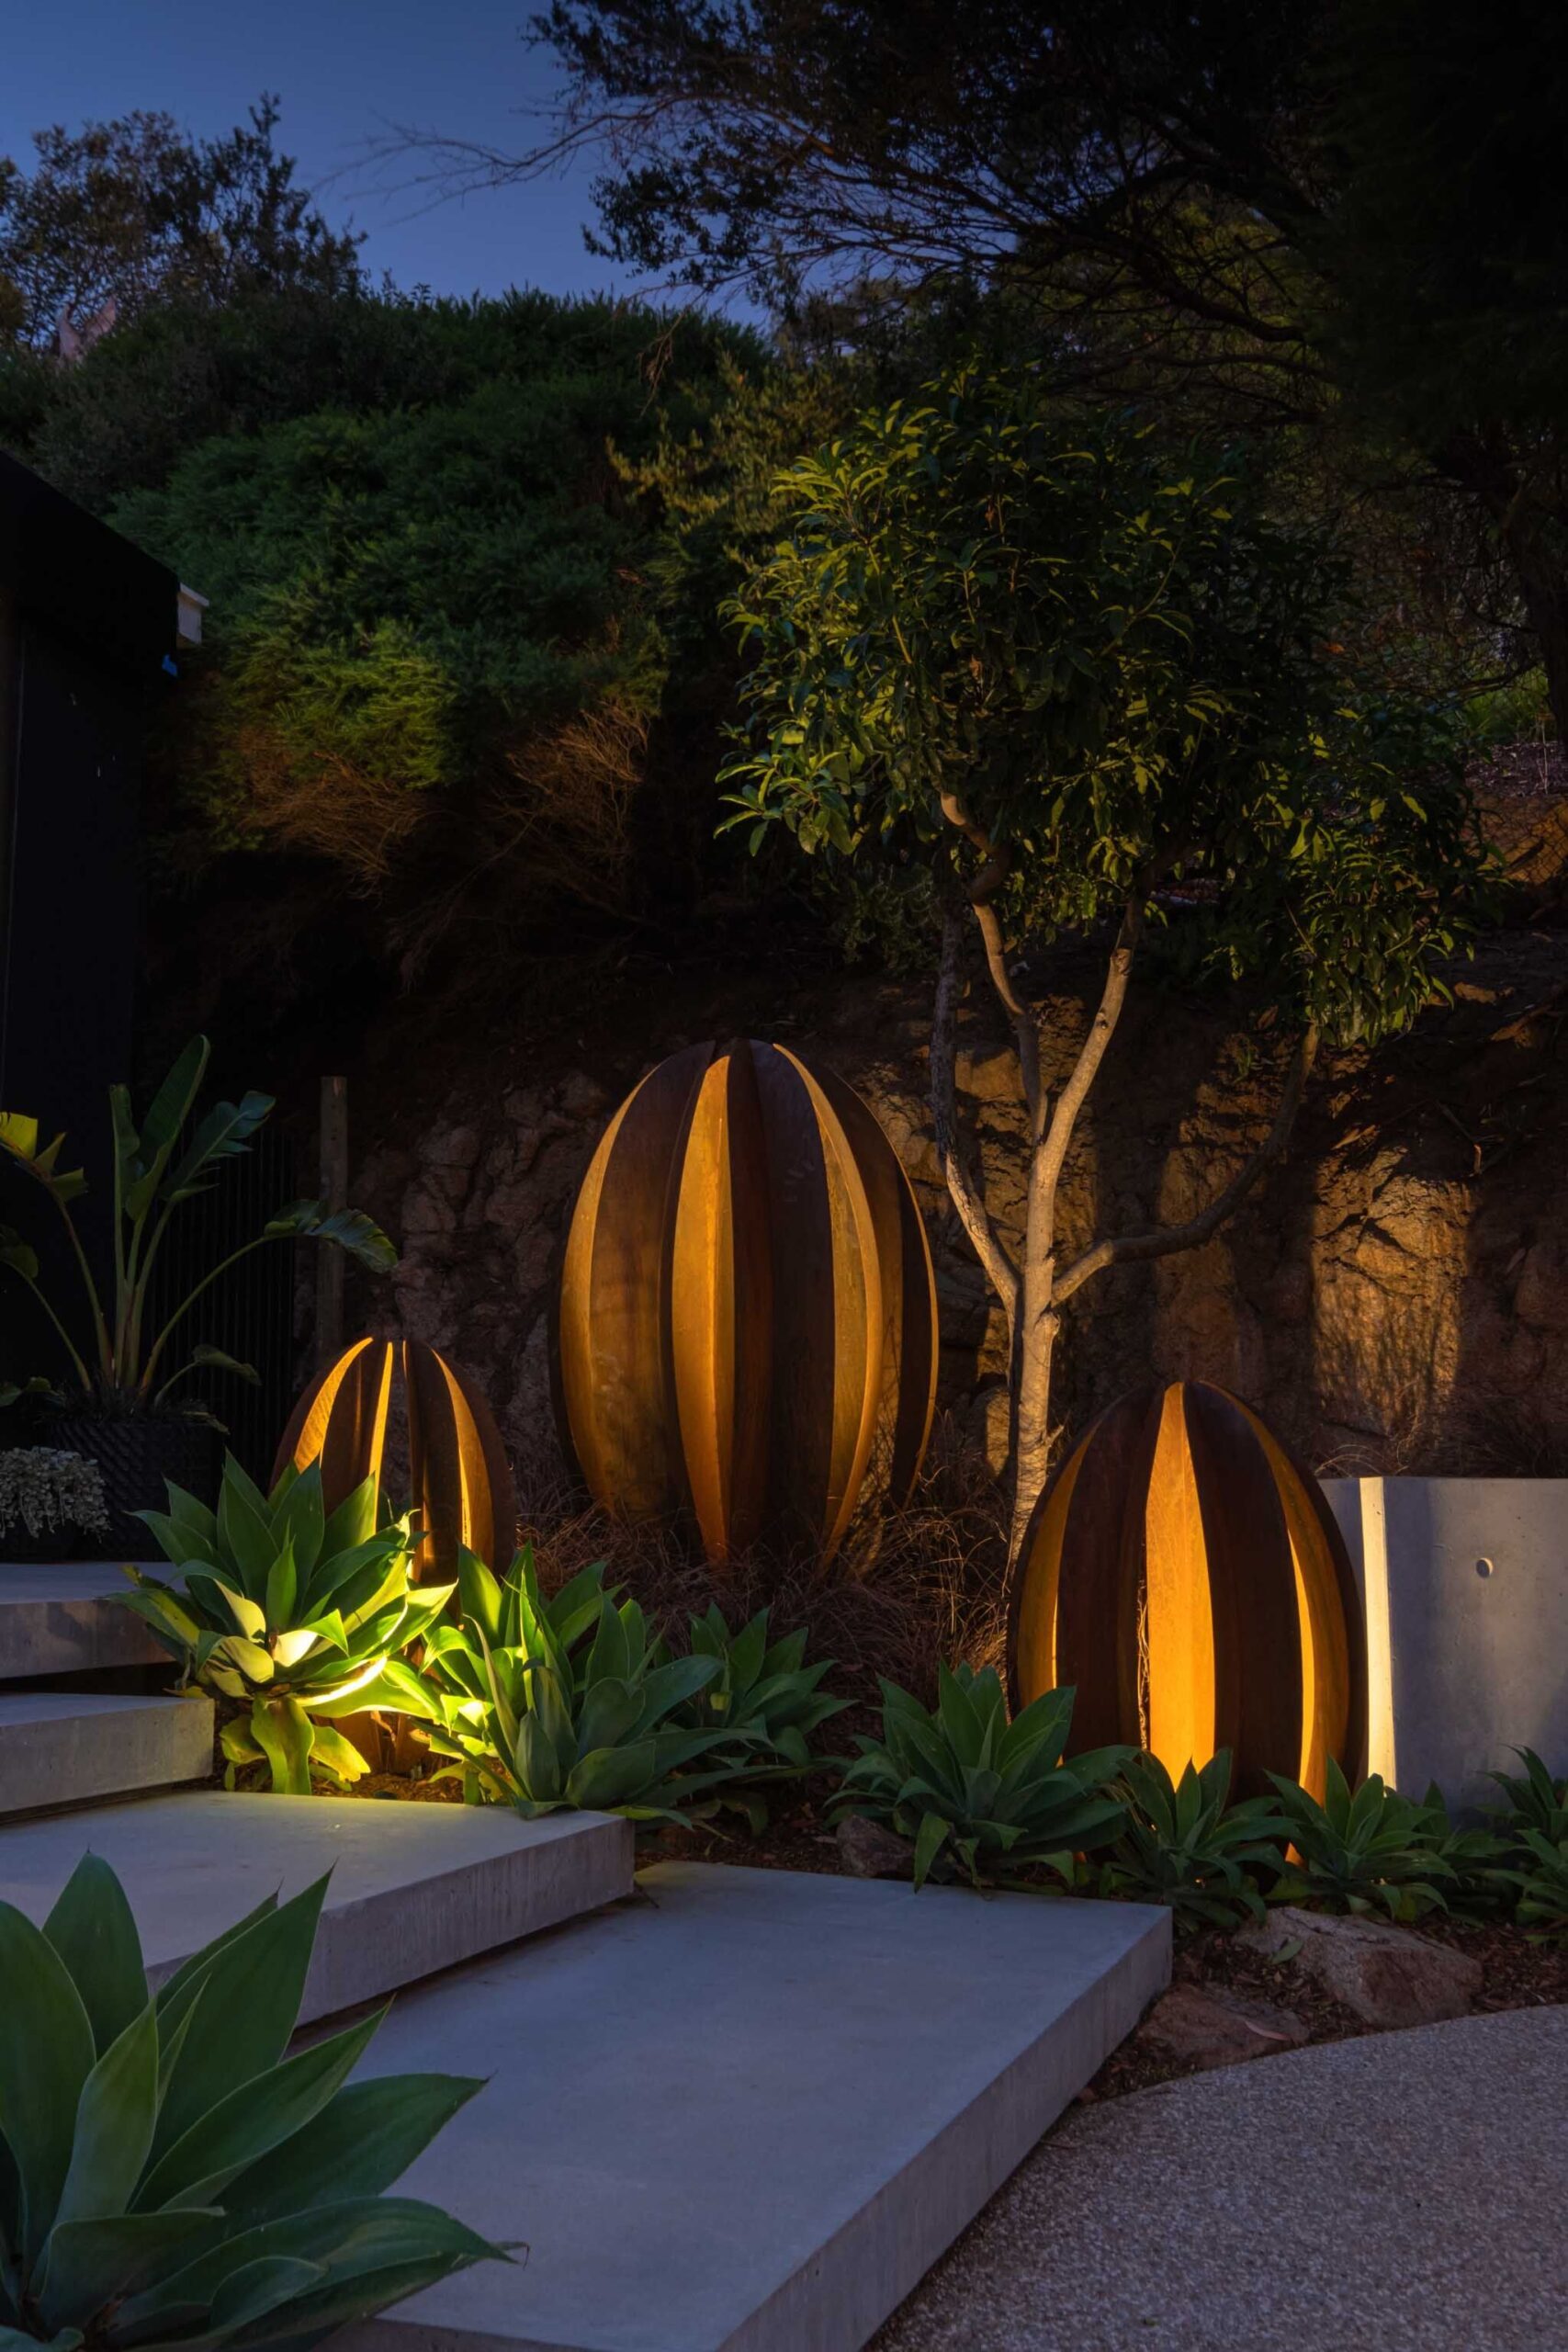 Illuminate Your Garden: Transform Your Outdoor Space with Stunning Wall Lights